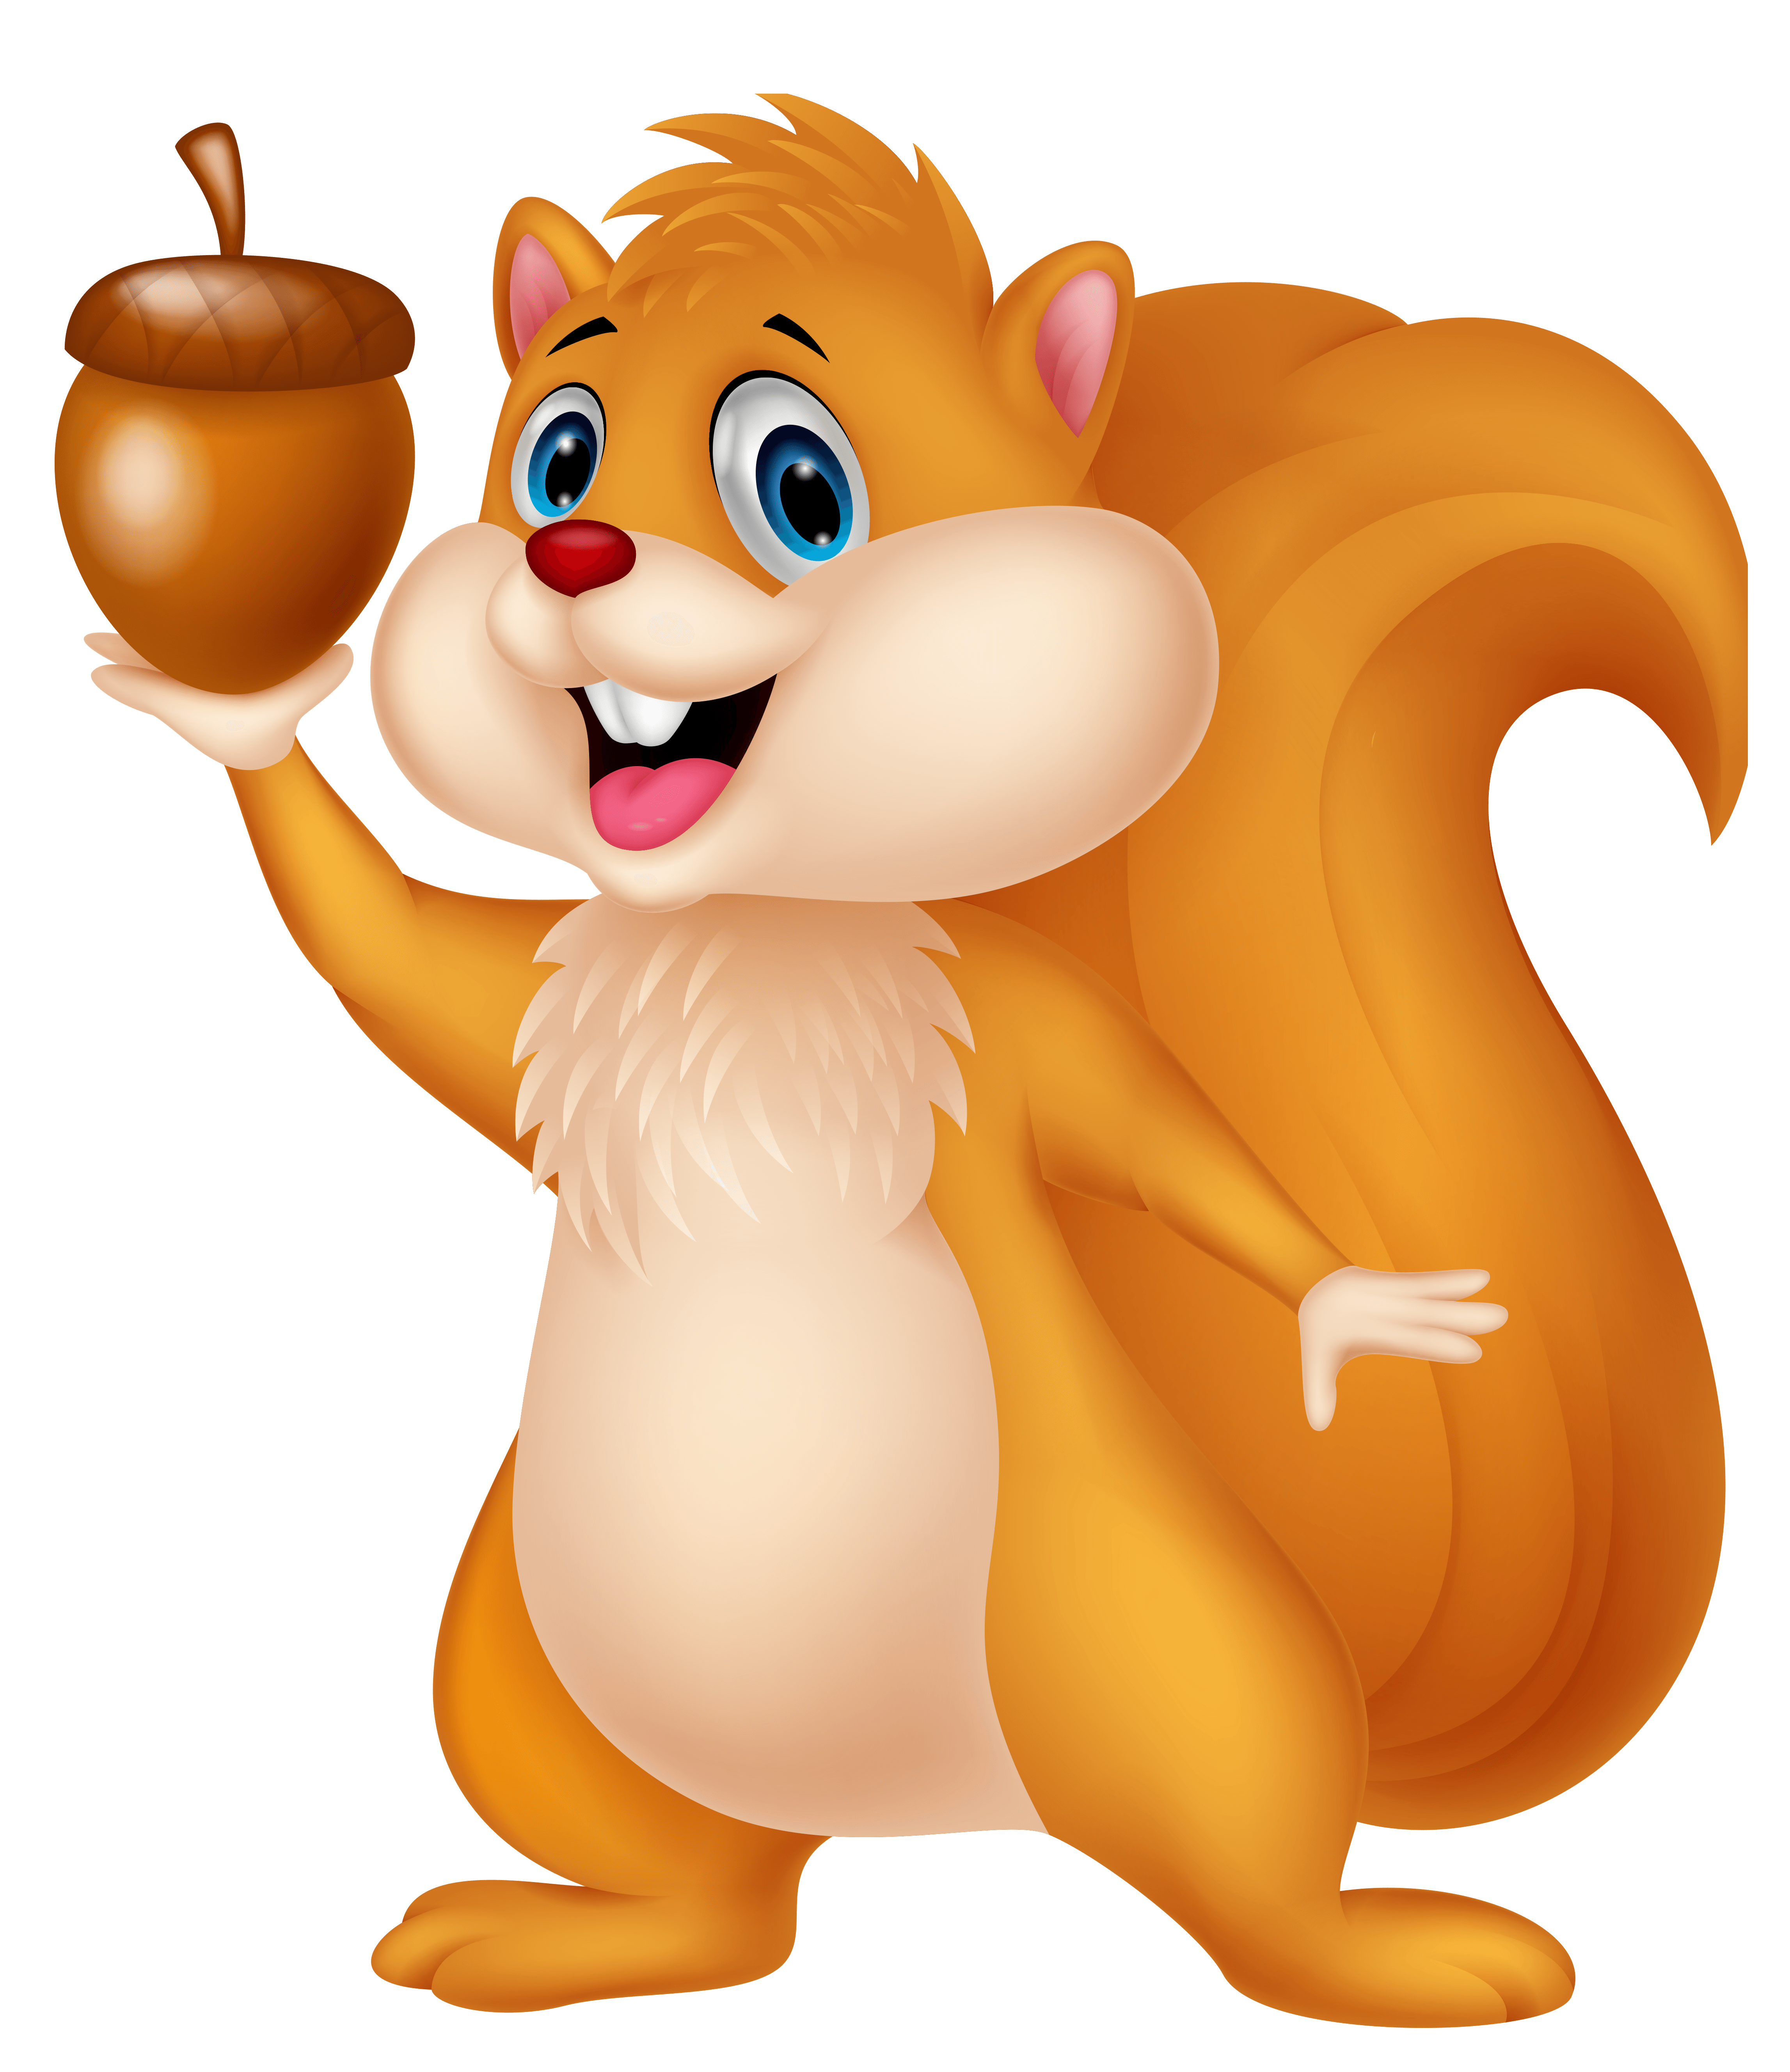 Squirrel clipart free download